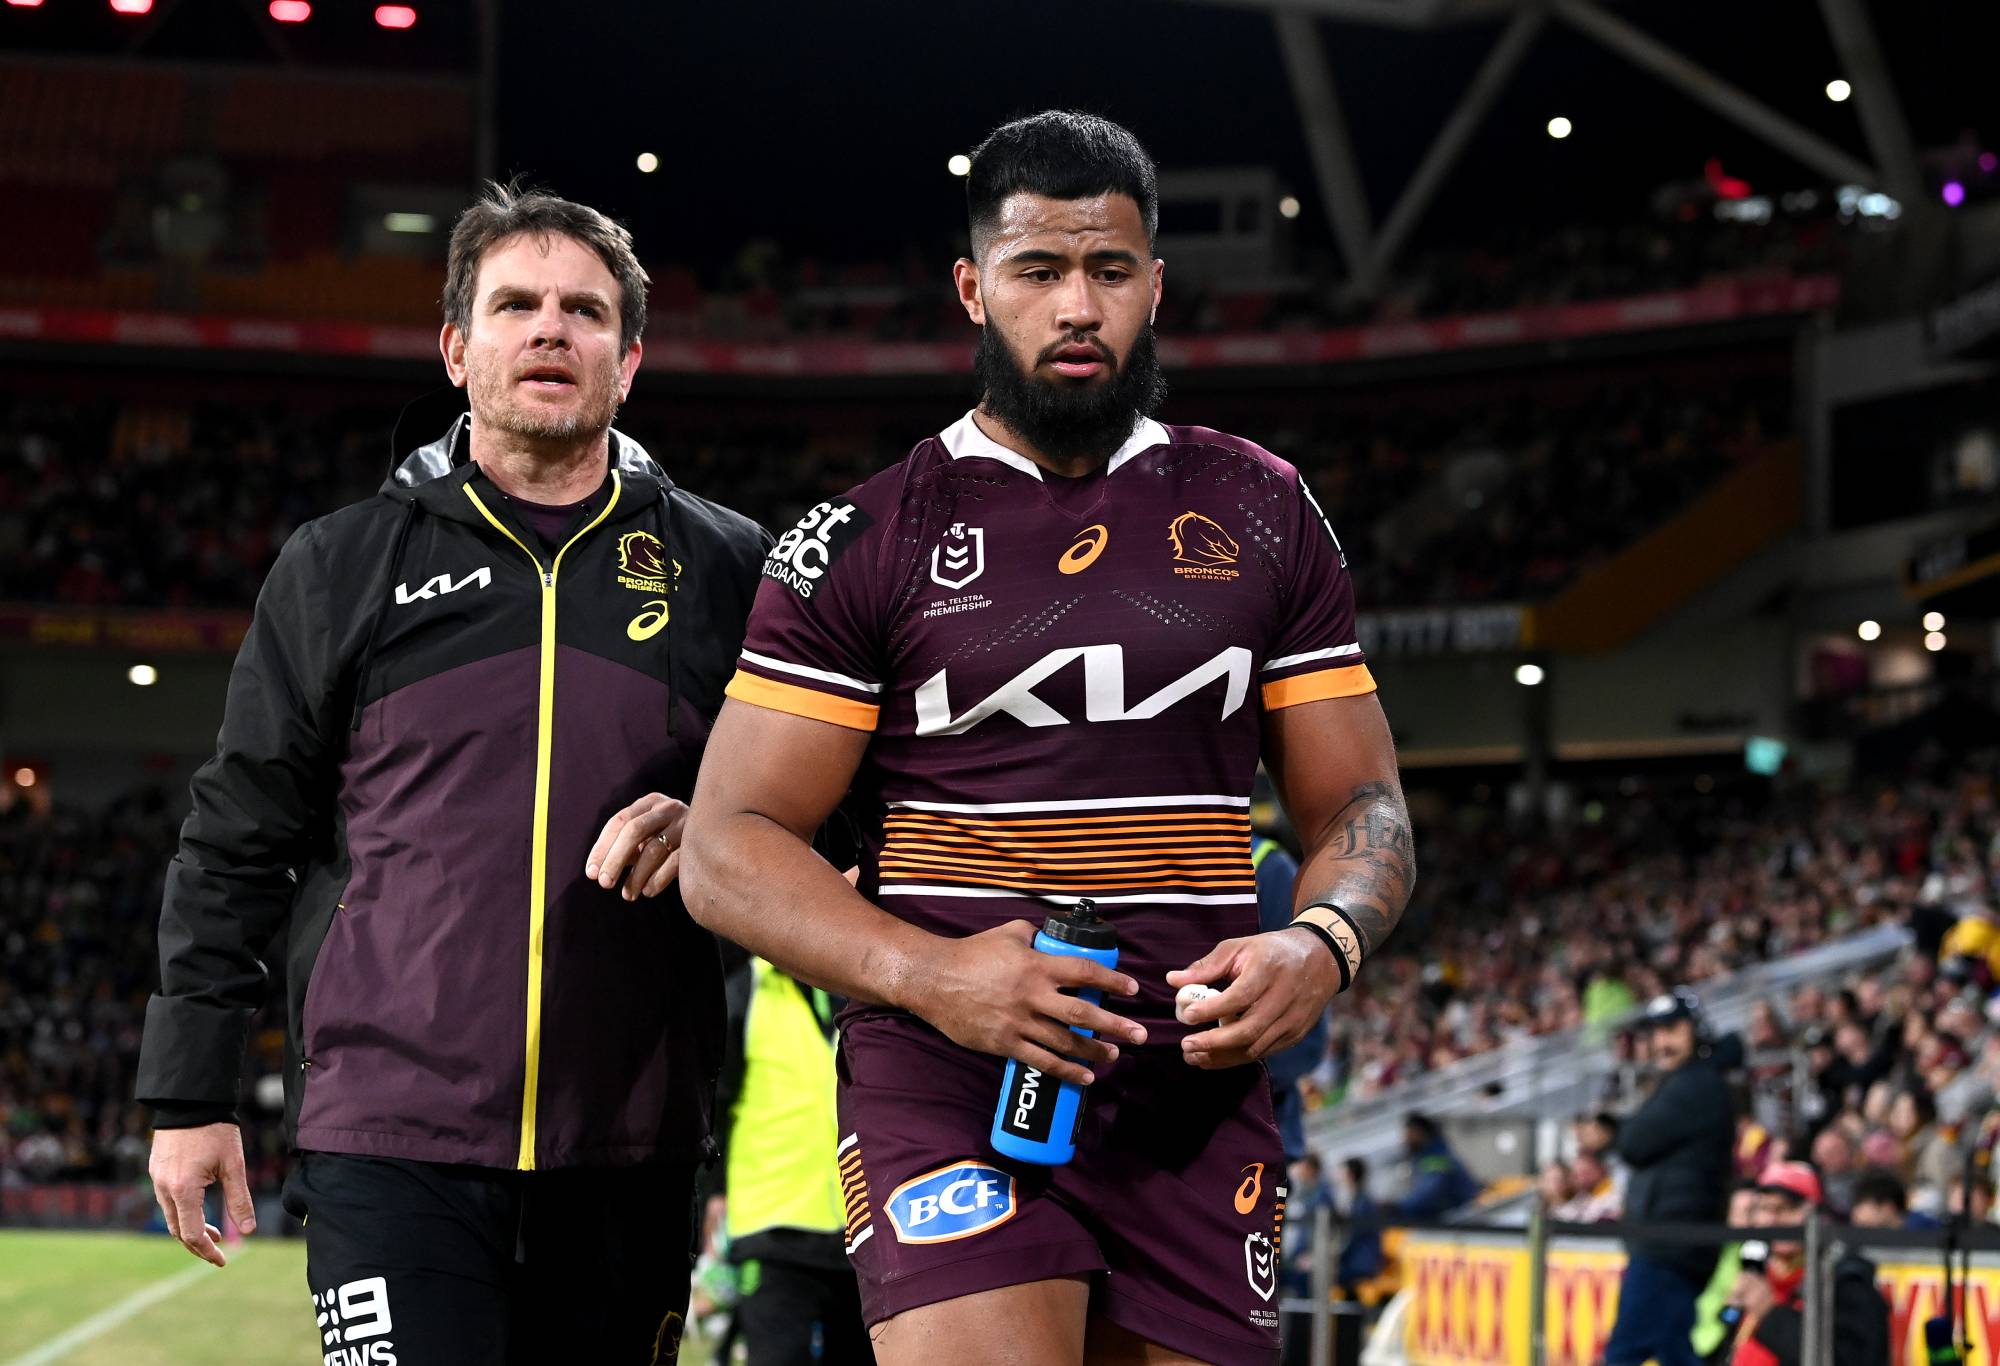 BRISBANE, AUSTRALIA - JUNE 11: Payne Haas of the Broncos is seen coming from the field with a sore shoulder during the round 14 NRL match between the Brisbane Broncos and the Canberra Raiders at Suncorp Stadium, on June 11, 2022, in Brisbane, Australia. (Photo by Bradley Kanaris/Getty Images)